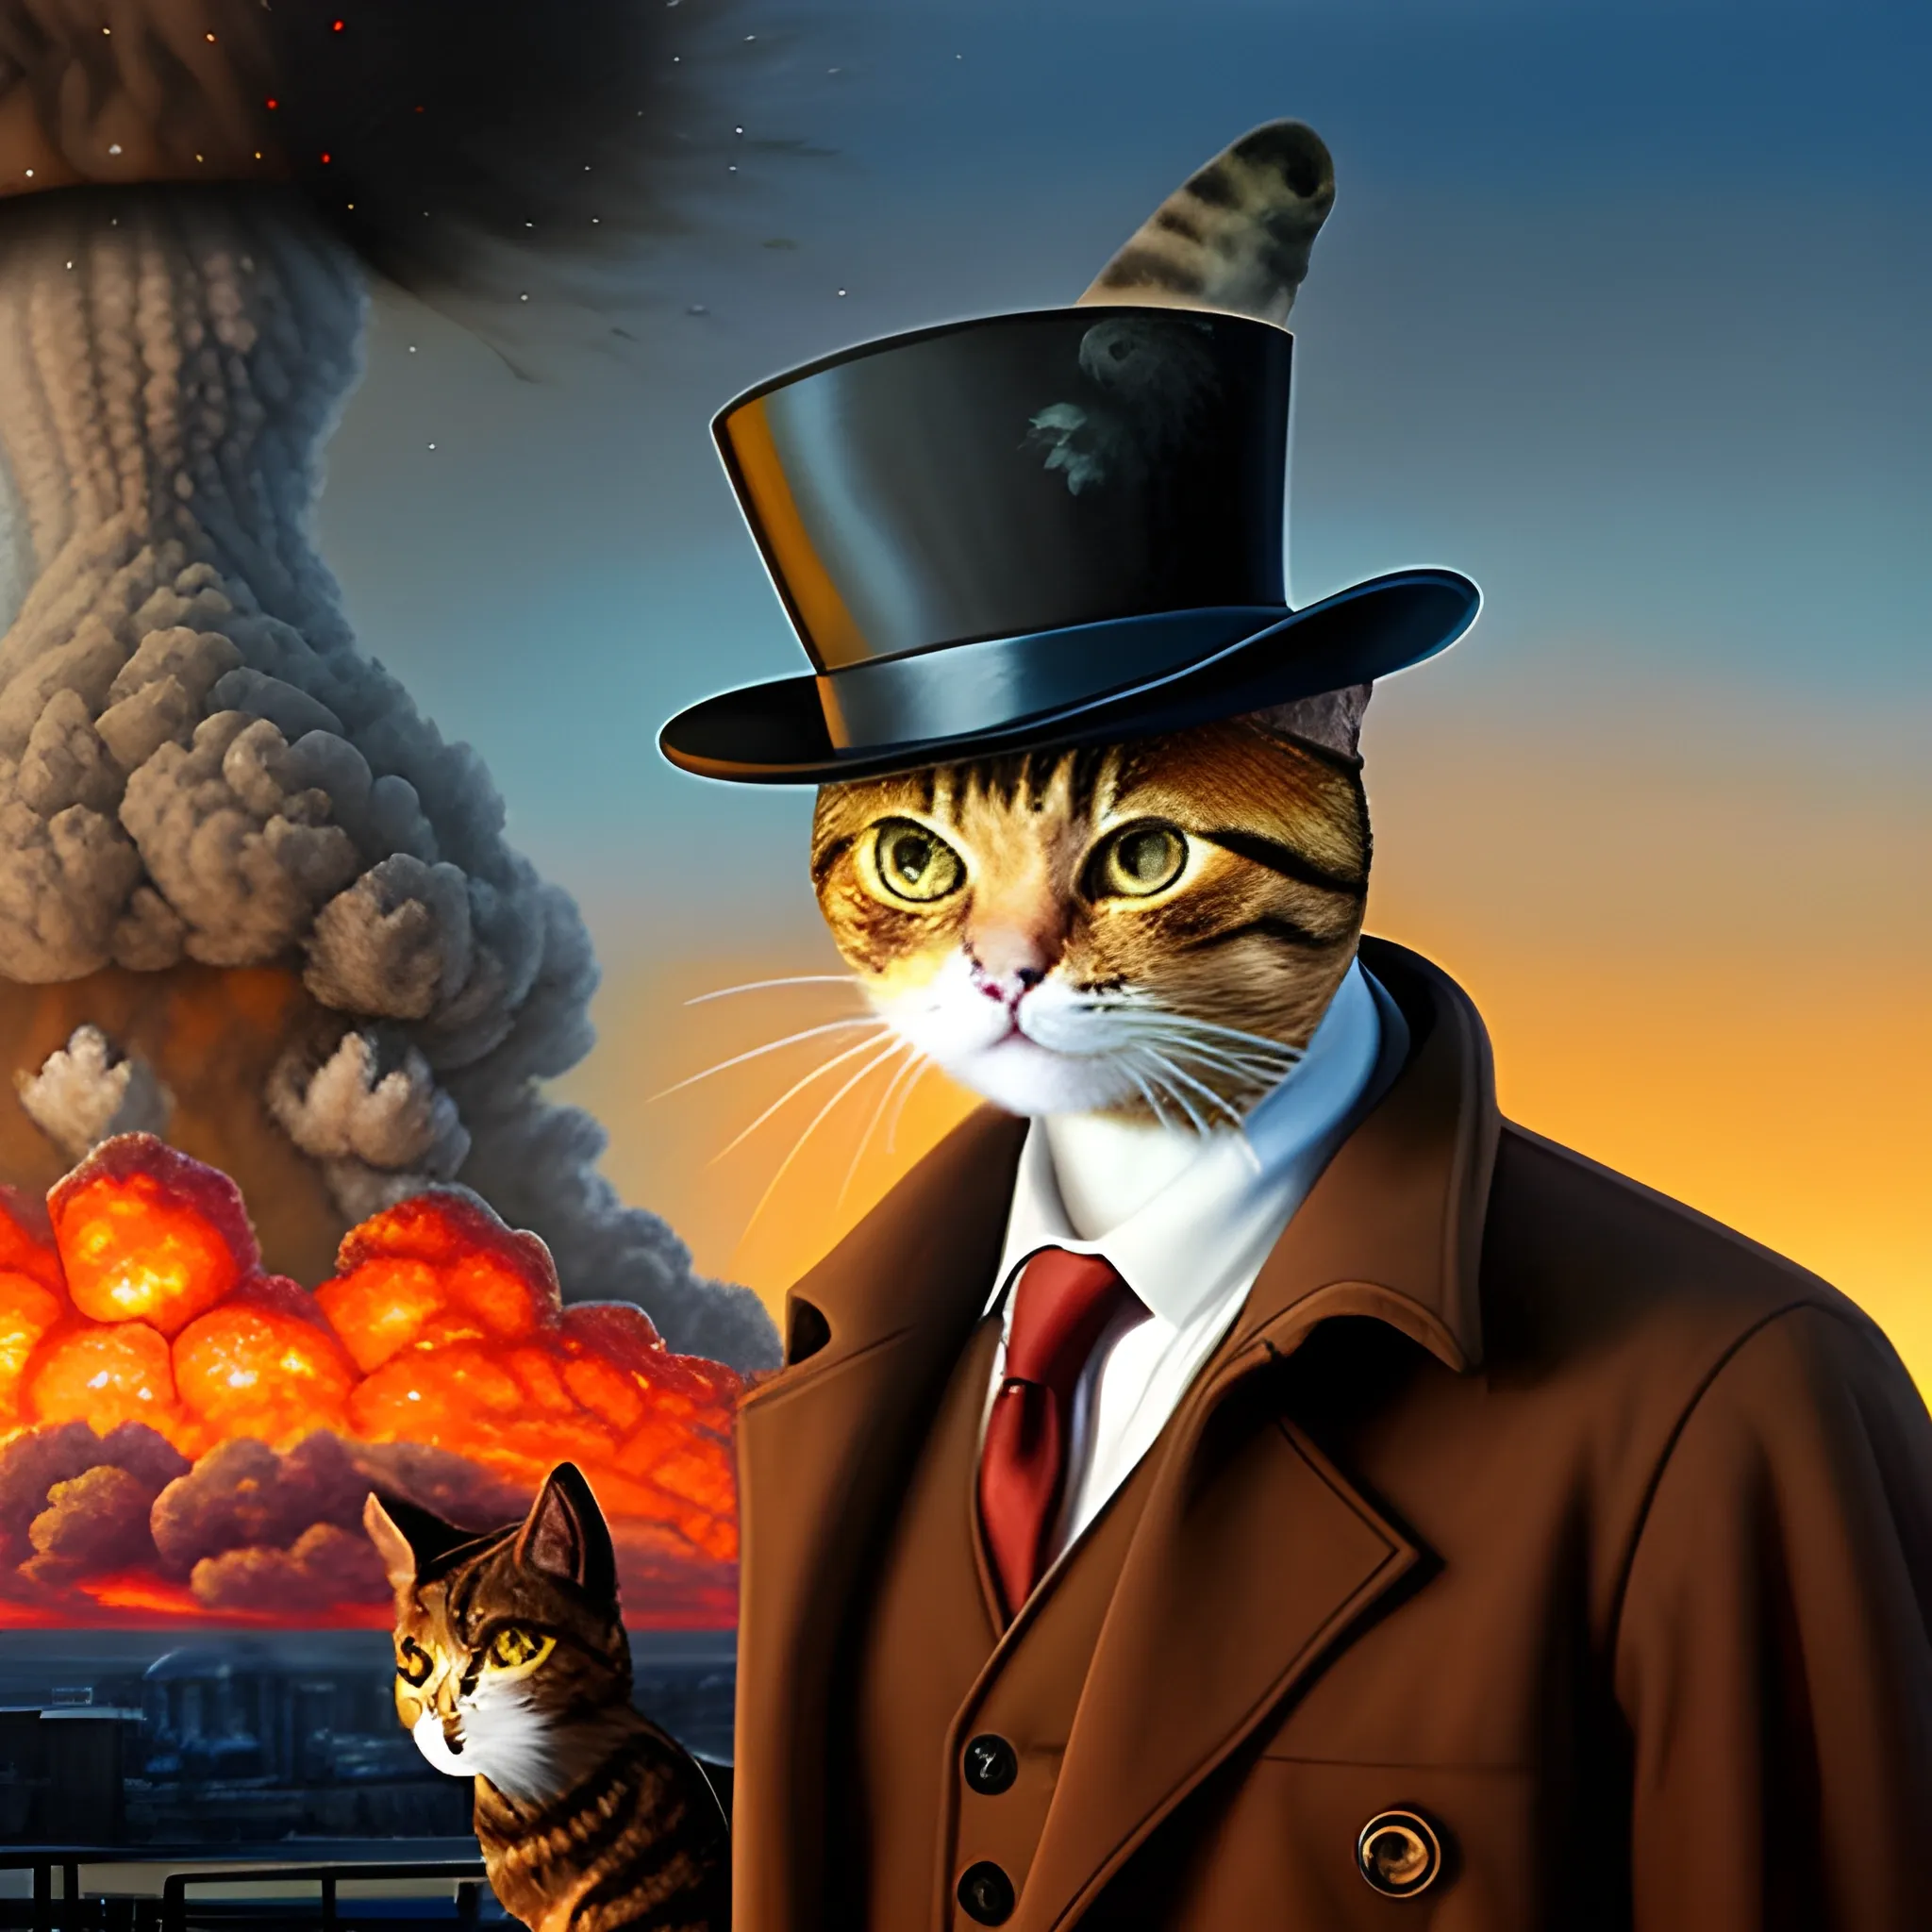 an humanoid cat whit a coat, a nuclear explotion in the background, the cat has a hat, realistic, cinematografic ,Oil Painting, the cat has a cigar